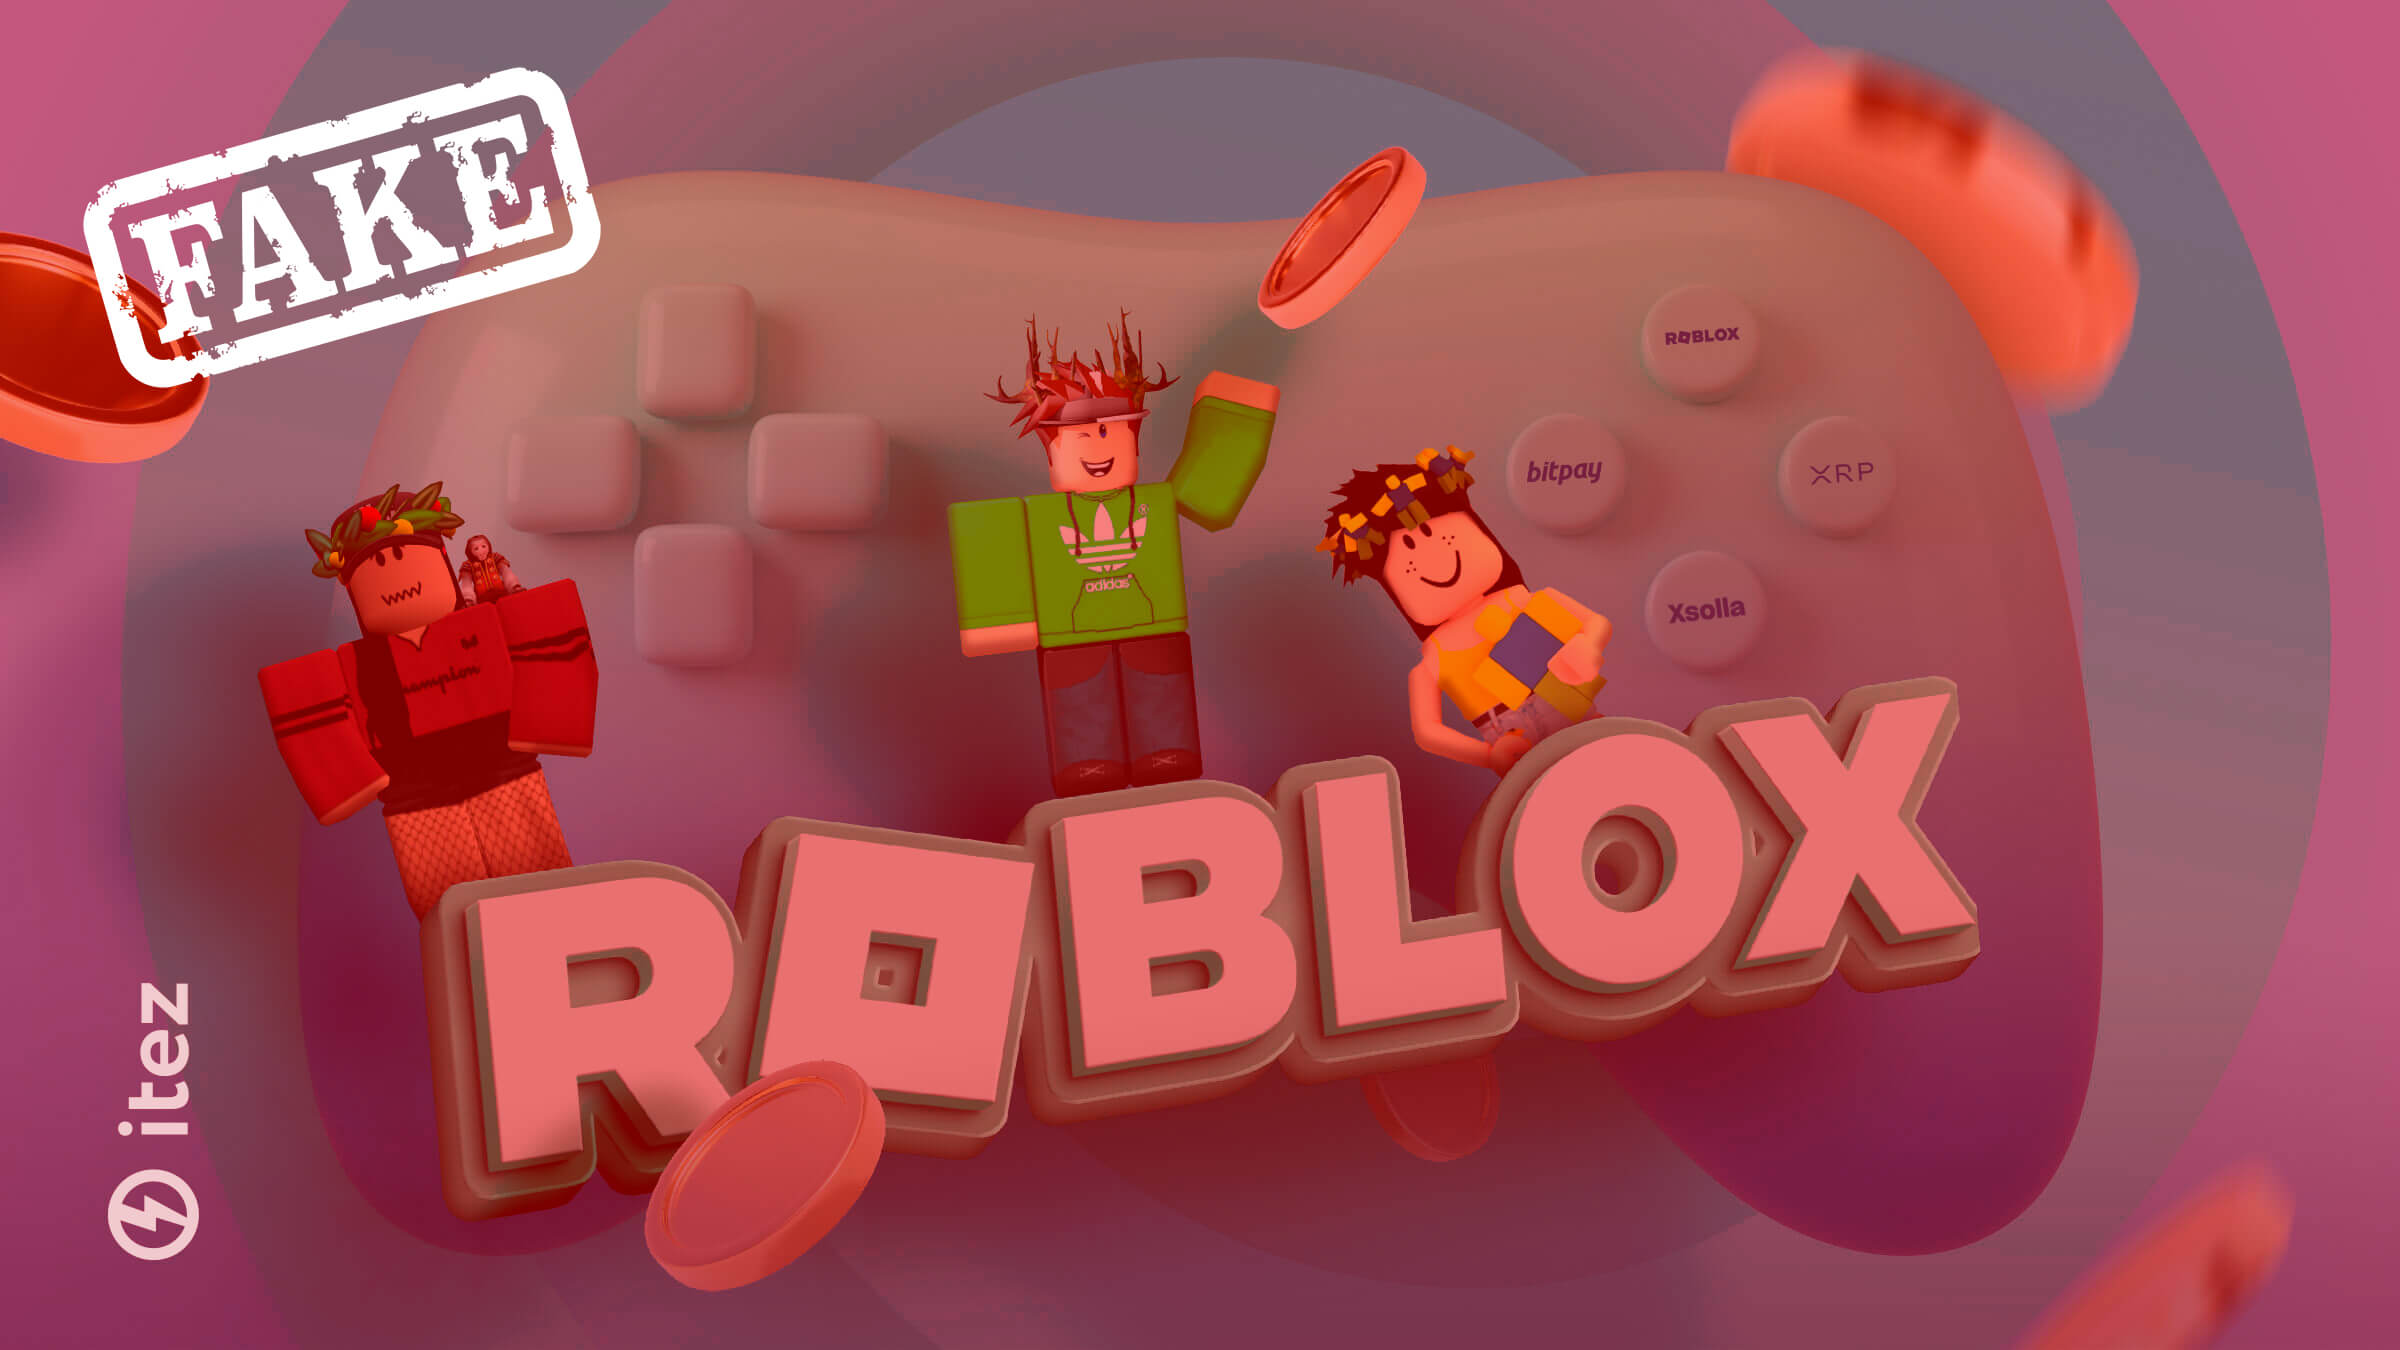 Roblox denies XRP integration by BitPay in partnership with Xsolla